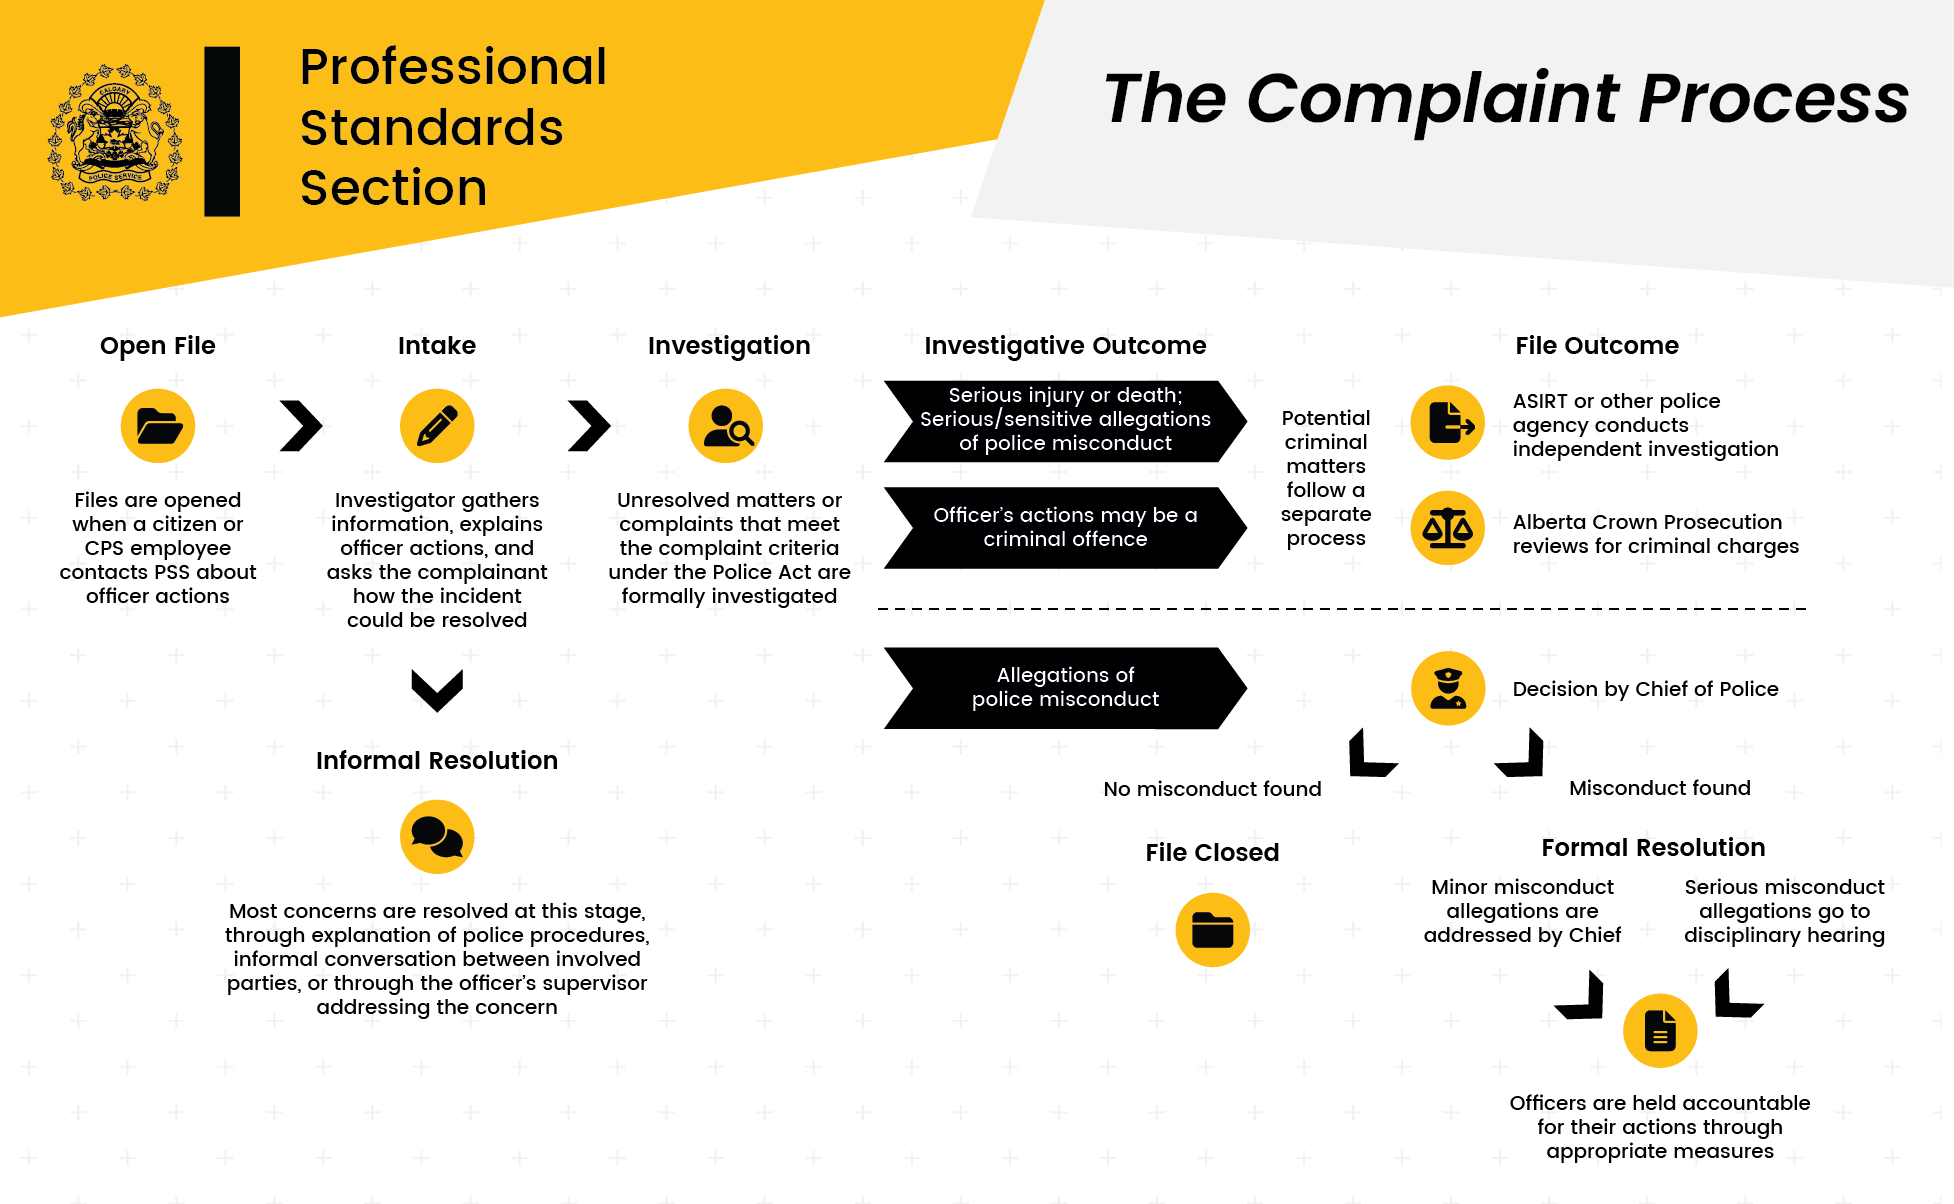 Flow chart of the PSS Complaint process from complaint to formal resolution